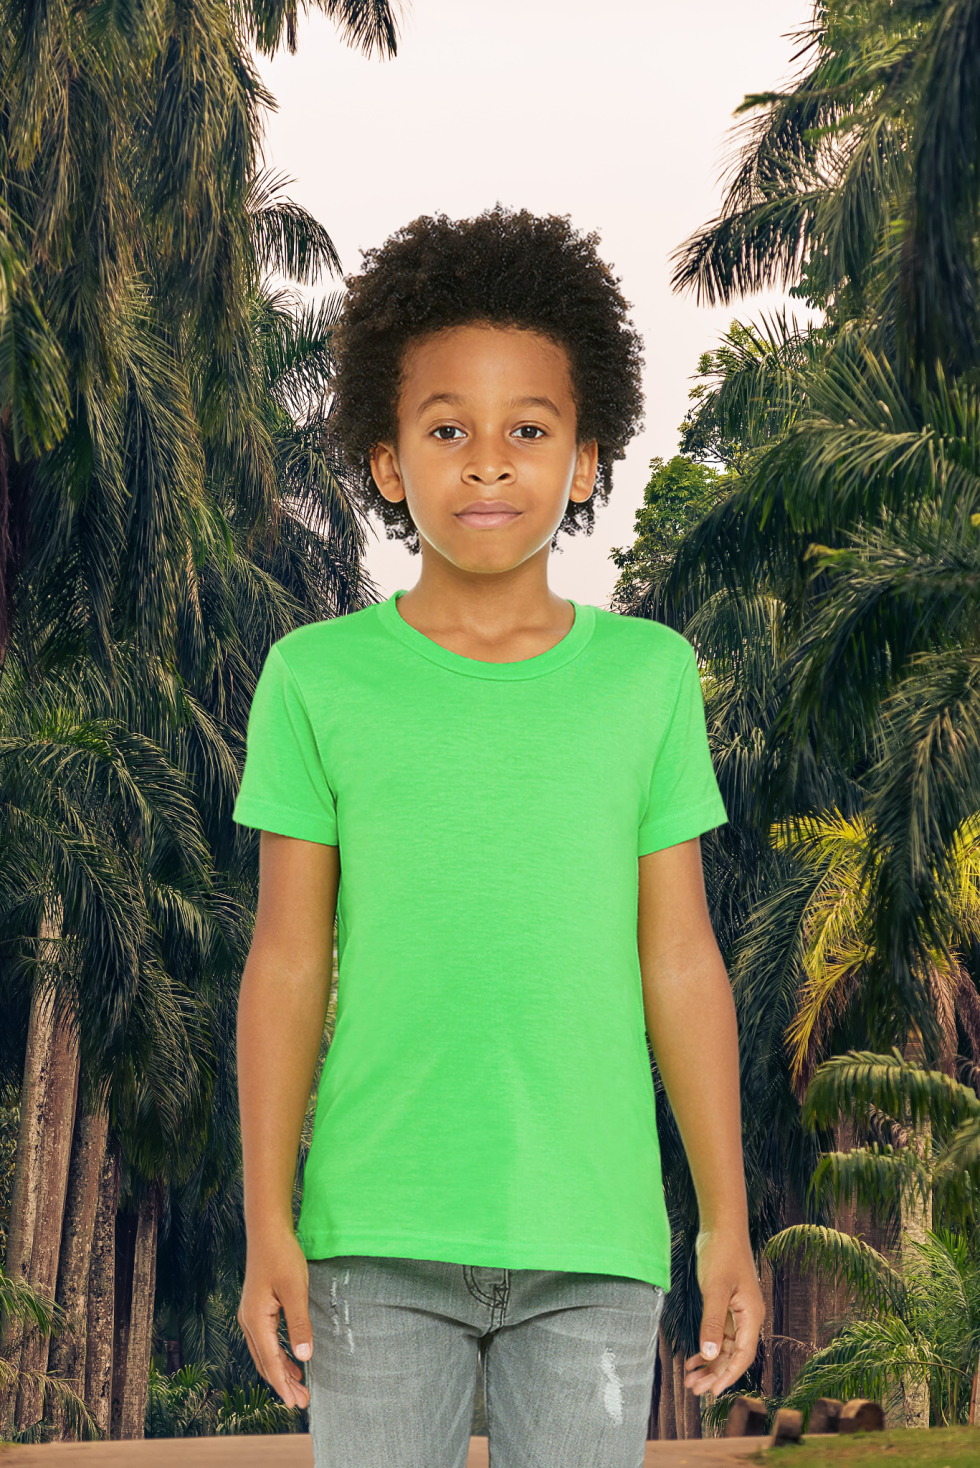 greenperidot youth - Crystal Infused Clothing - Apparel - T-Shirts